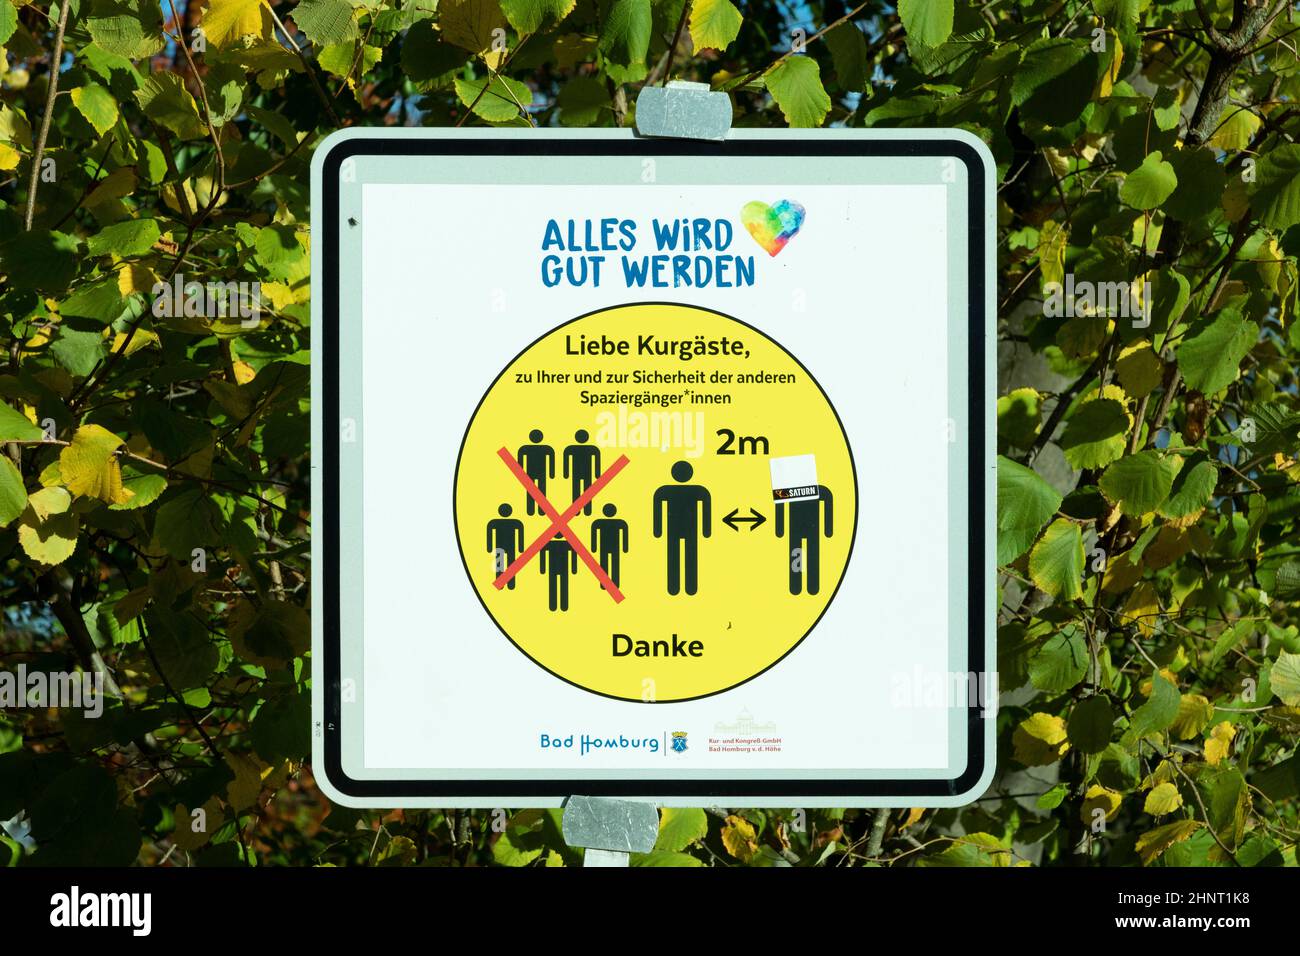 Corona warning sign in the Park in Bad Homburg saying everything will be all right and keep distance 2 meters Stock Photo